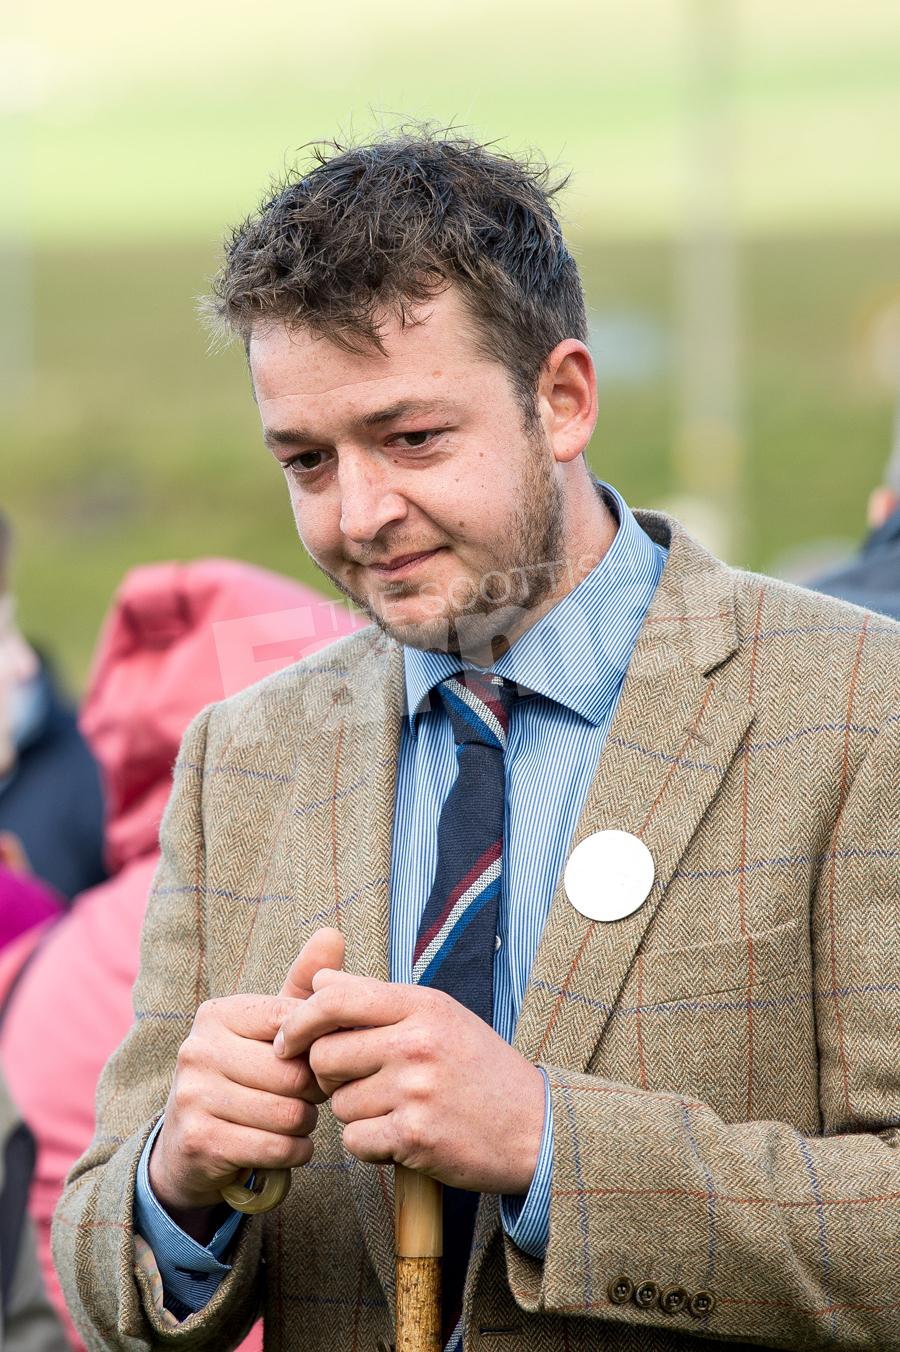 Callum  Hume from Sundhope judging the Cheviot classes at Abington show. Ref: RH19817580.